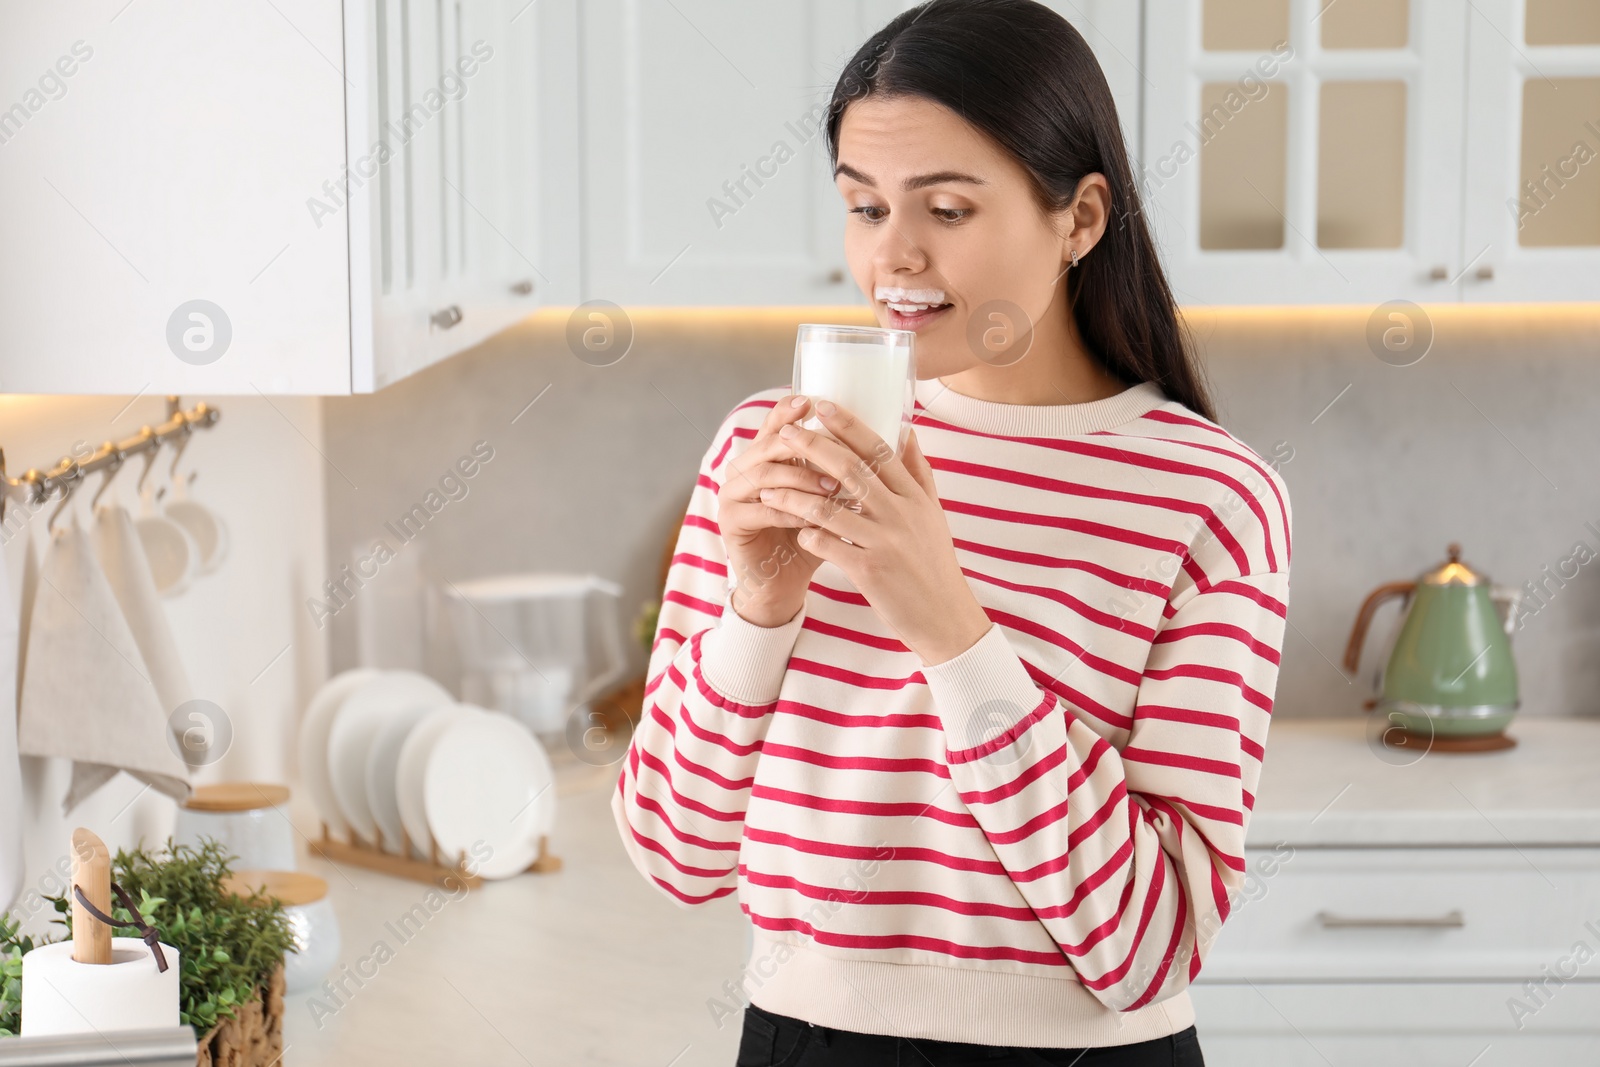 Photo of Cute woman with milk mustache drinking tasty dairy drink in kitchen. Space for text